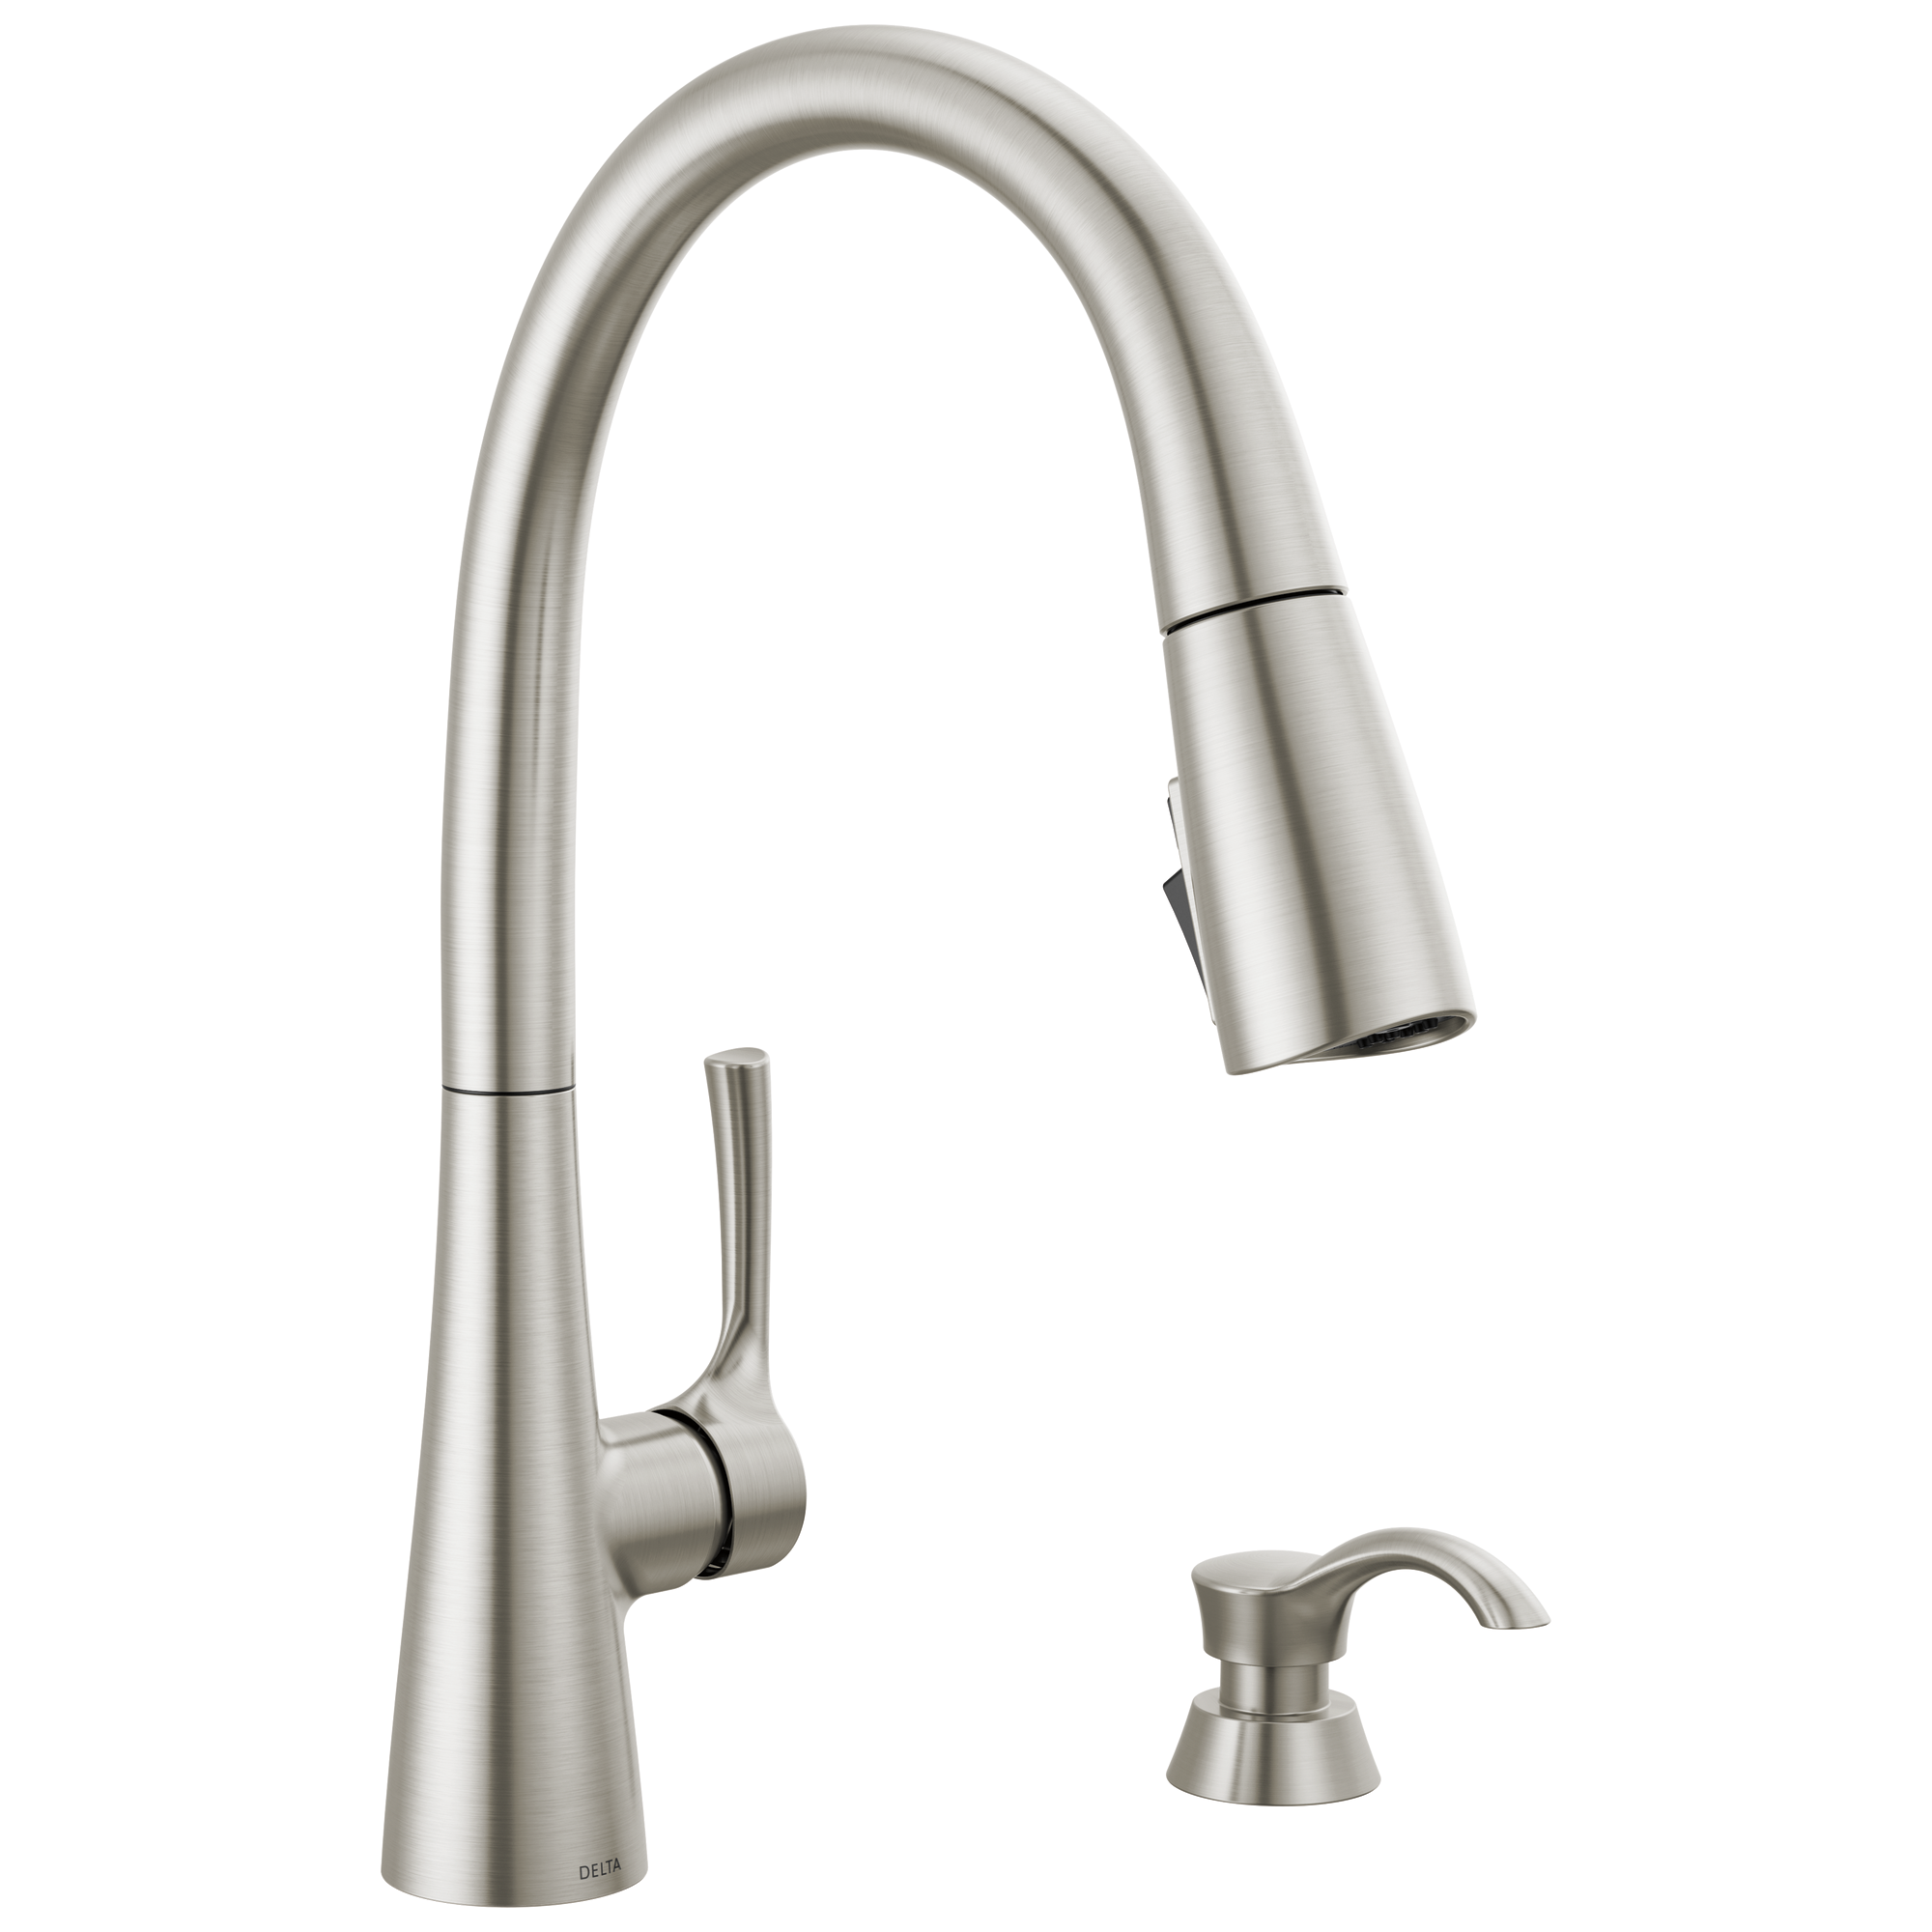 Details about   Delta Varos Pull Down Kitchen Faucet Stainless Steel w/ Soap Dispenser-Pls Read 